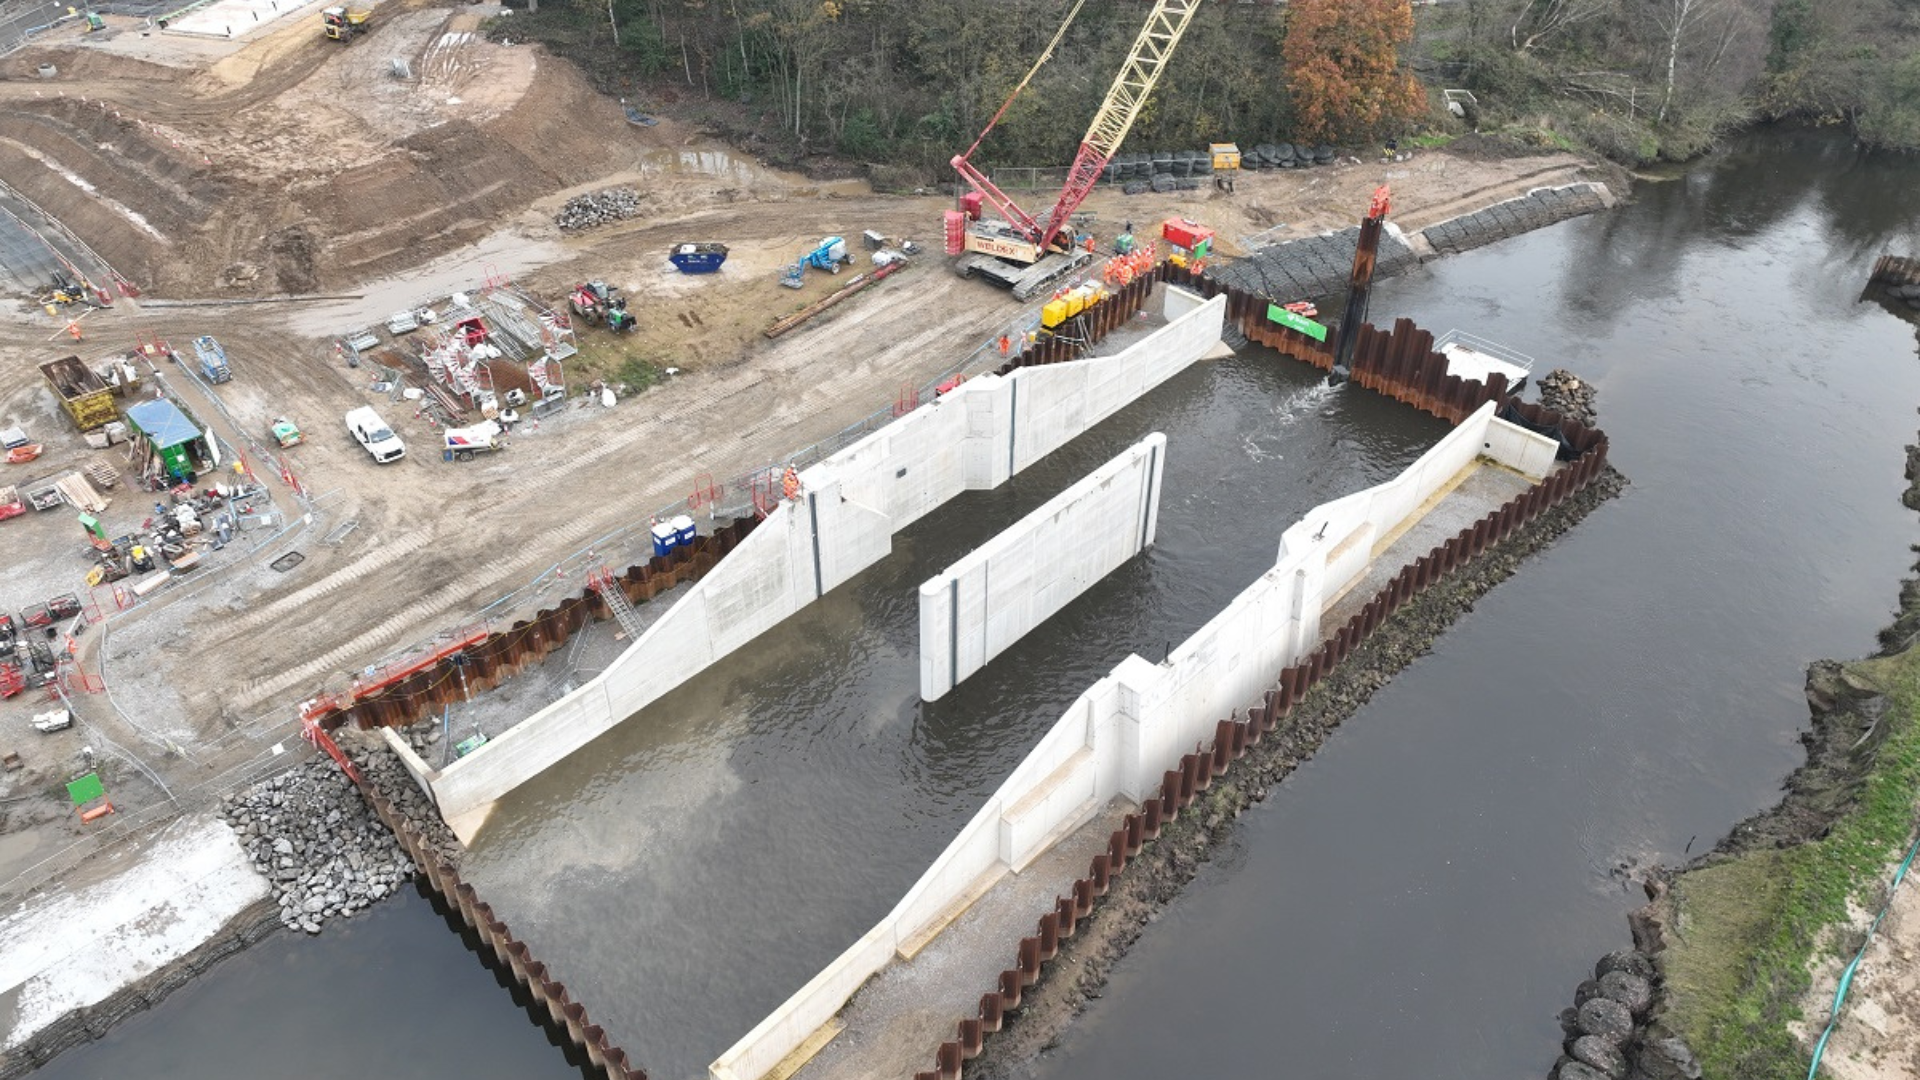 The progress of the flood alleviation scheme phase two - showing partial building works within the river aire